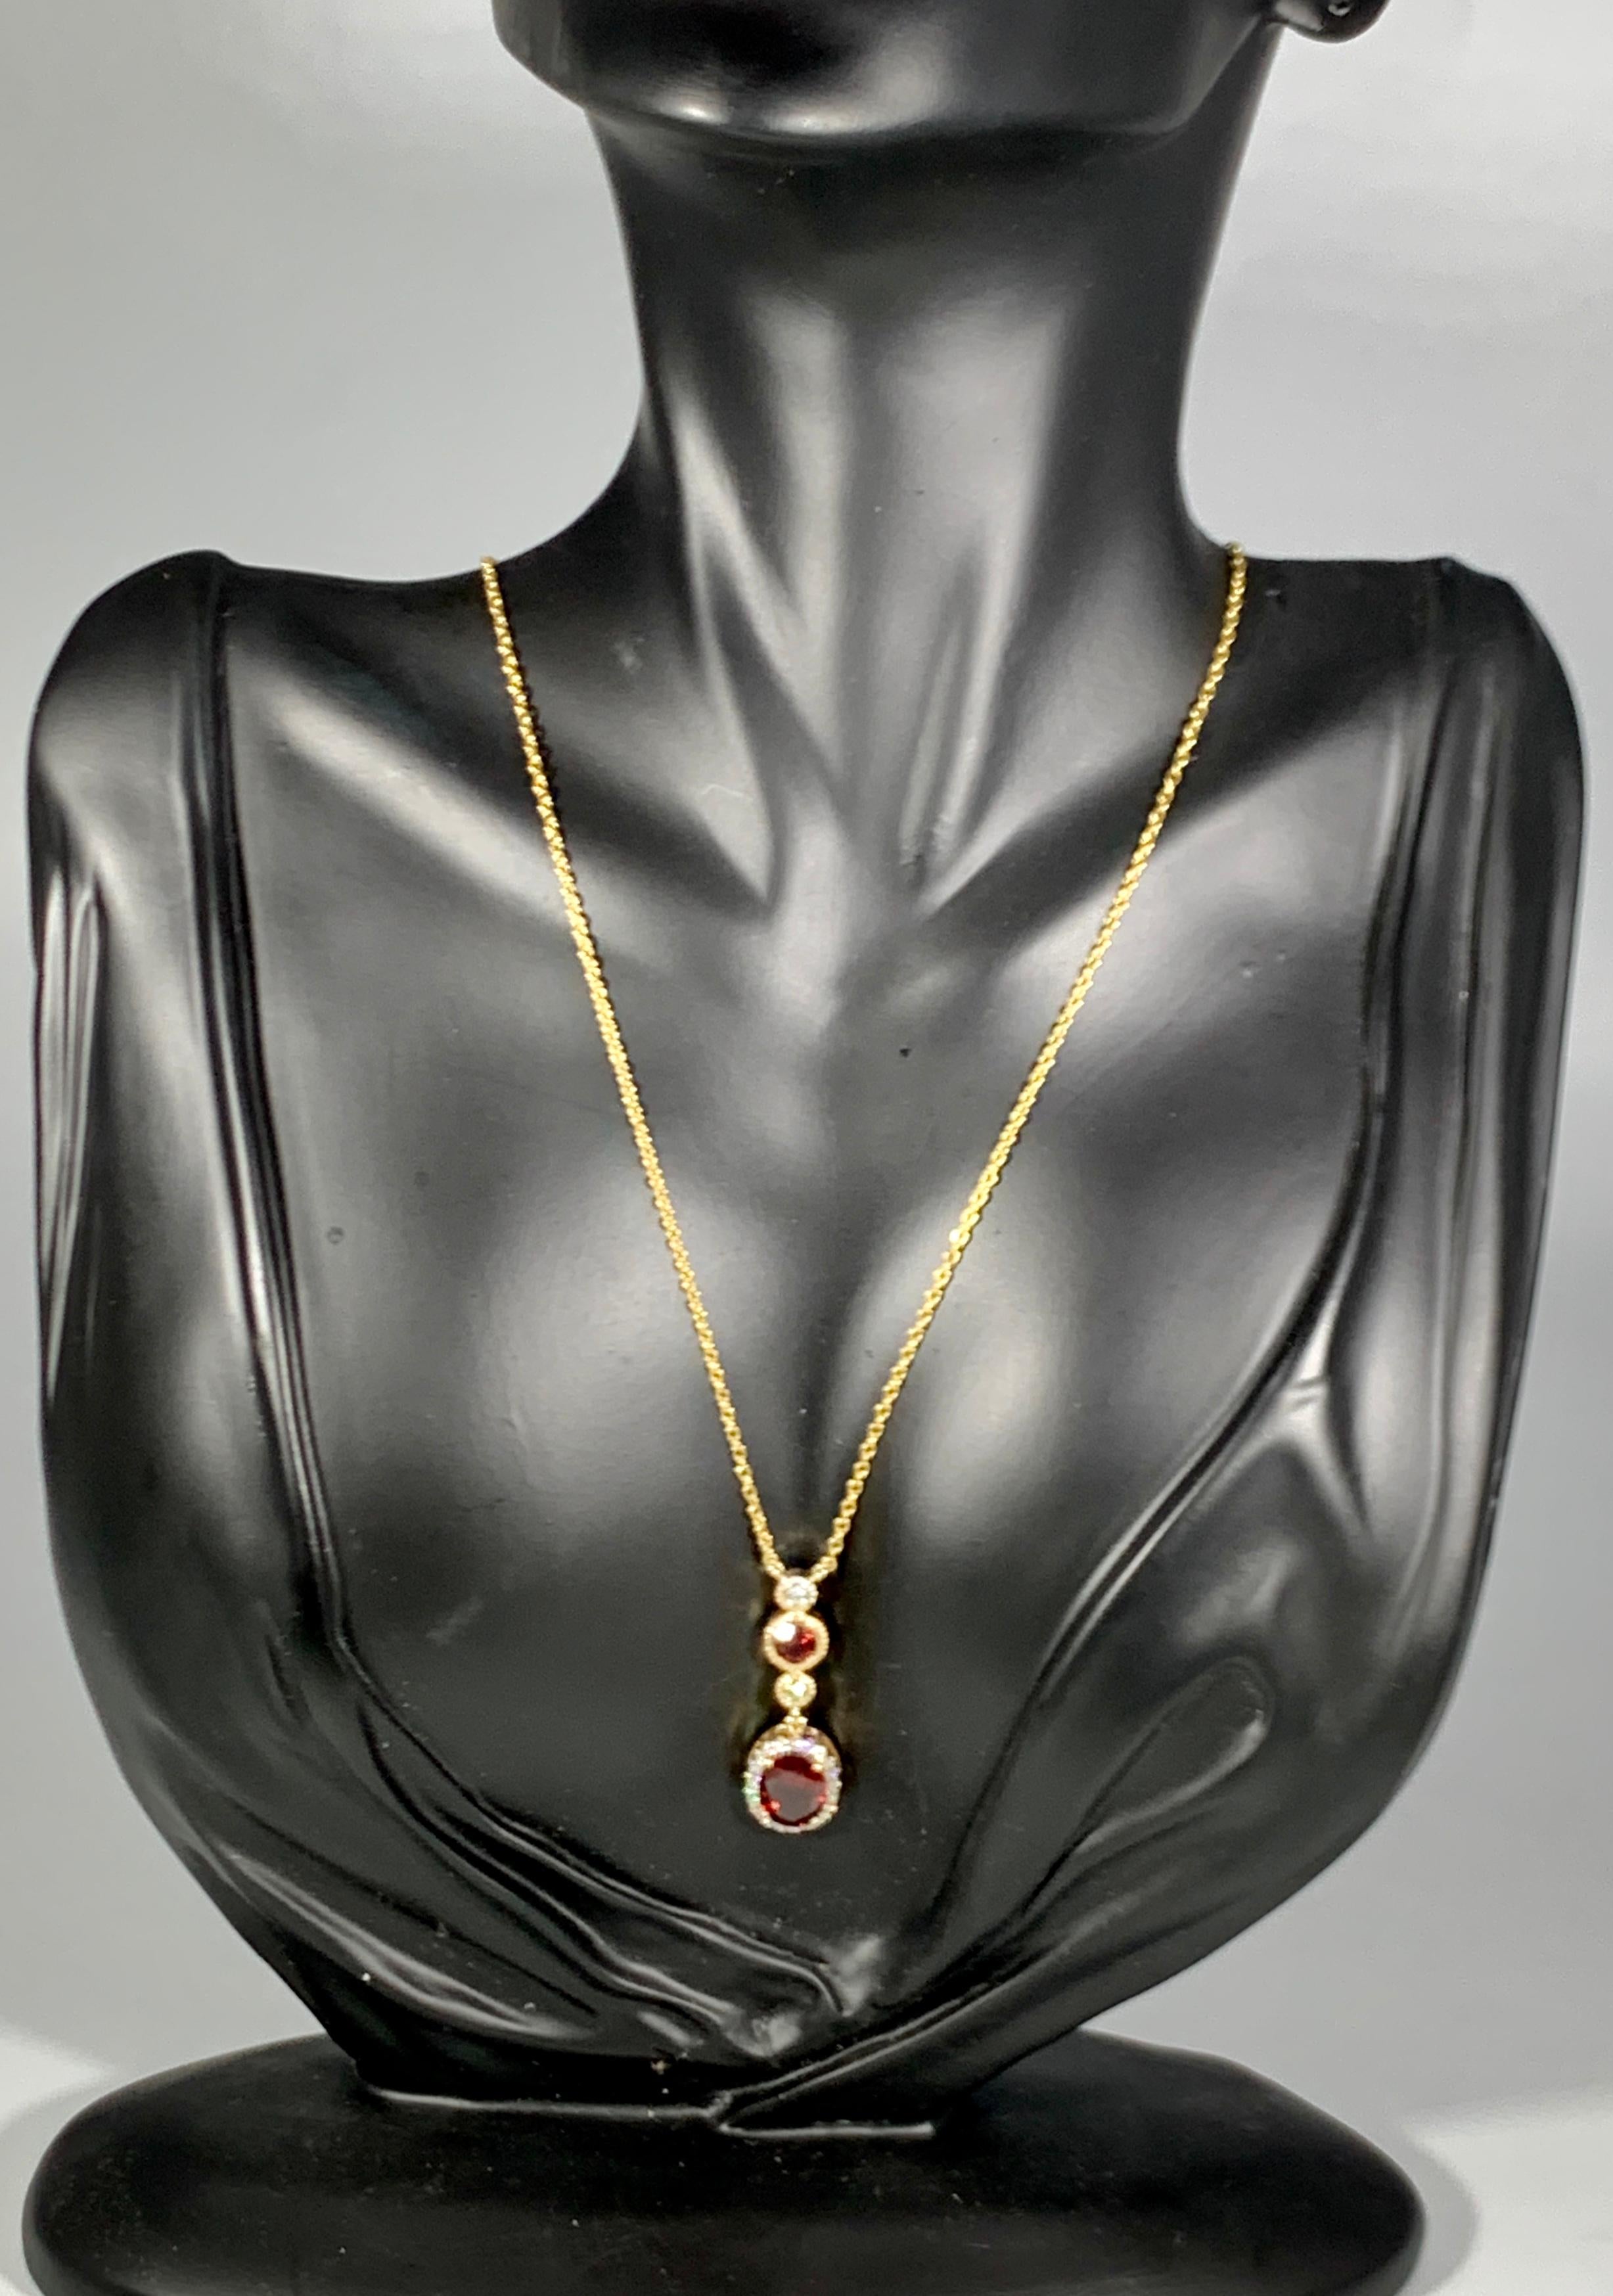 6 Carat Oval Shape Garnet and 0.6 Carat Diamond Necklace in 14 Karat Yellow Gold For Sale 4